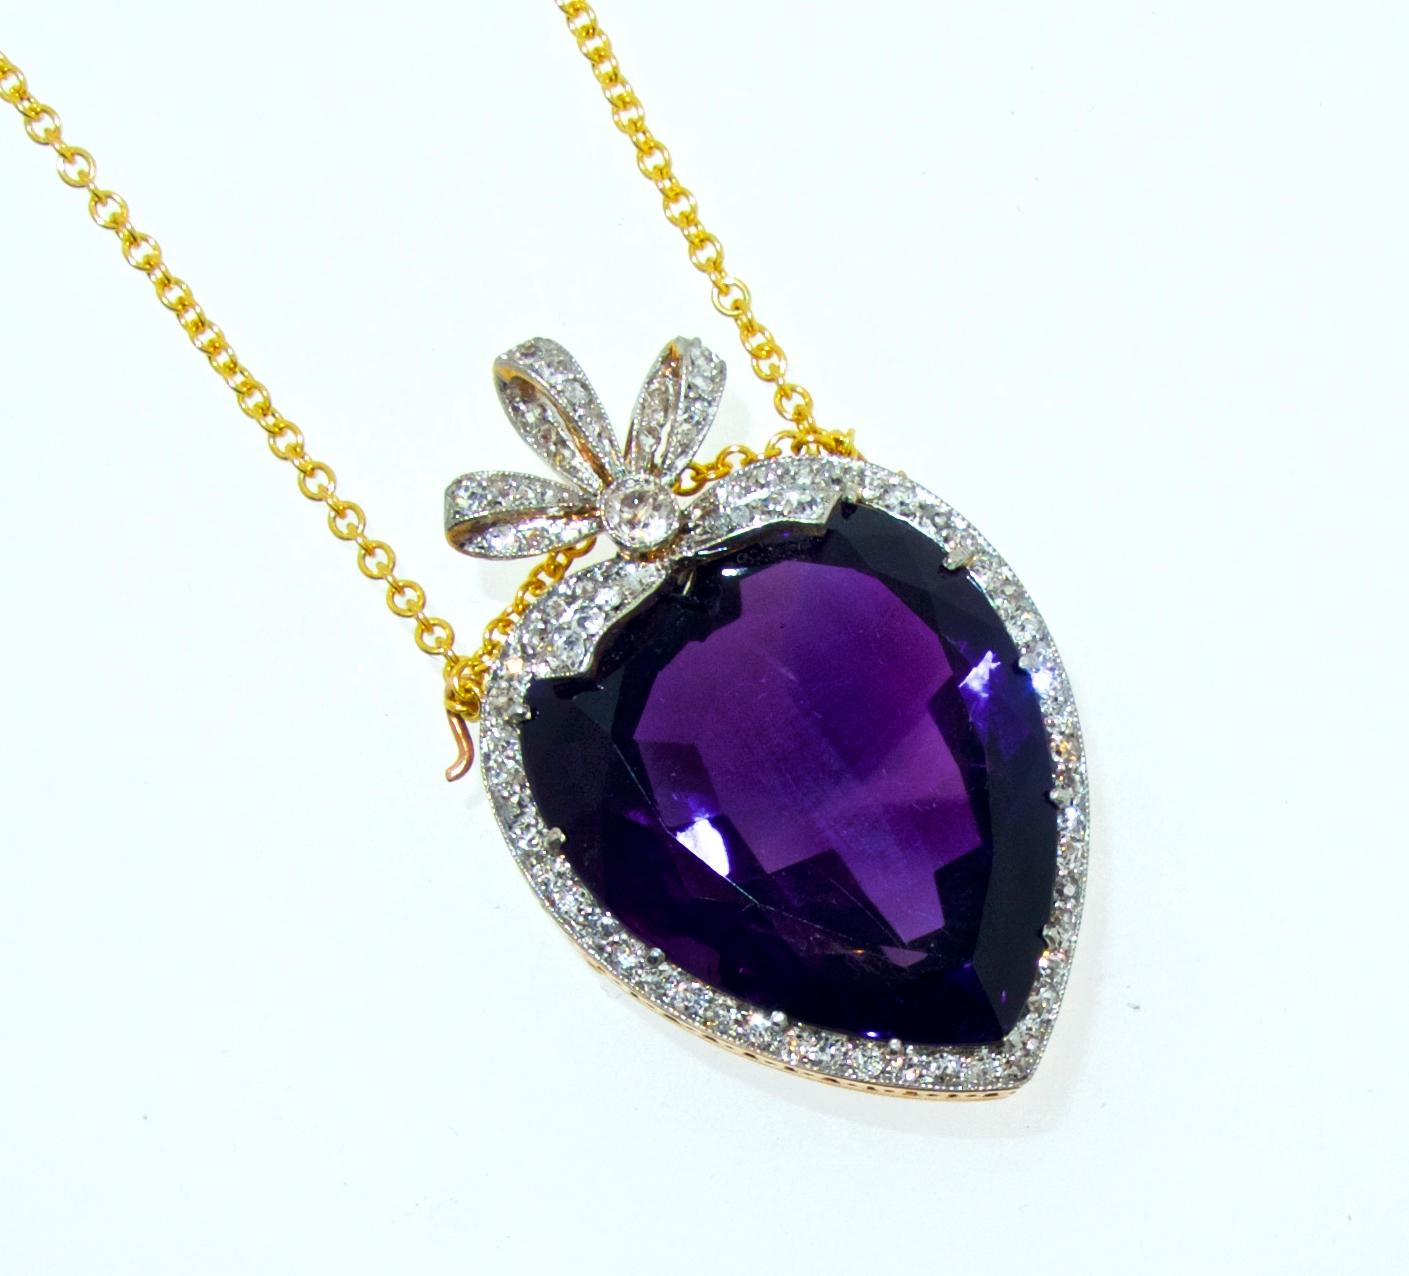 The center deep violet purple amethyst is from the Siberian area of Russian, it weighs 20 cts., approximately.  This center heart shaped stone is surrounded and accented by 80 old cut white diamonds.  This pin/pendant is suspended on a modern 5 ct.,